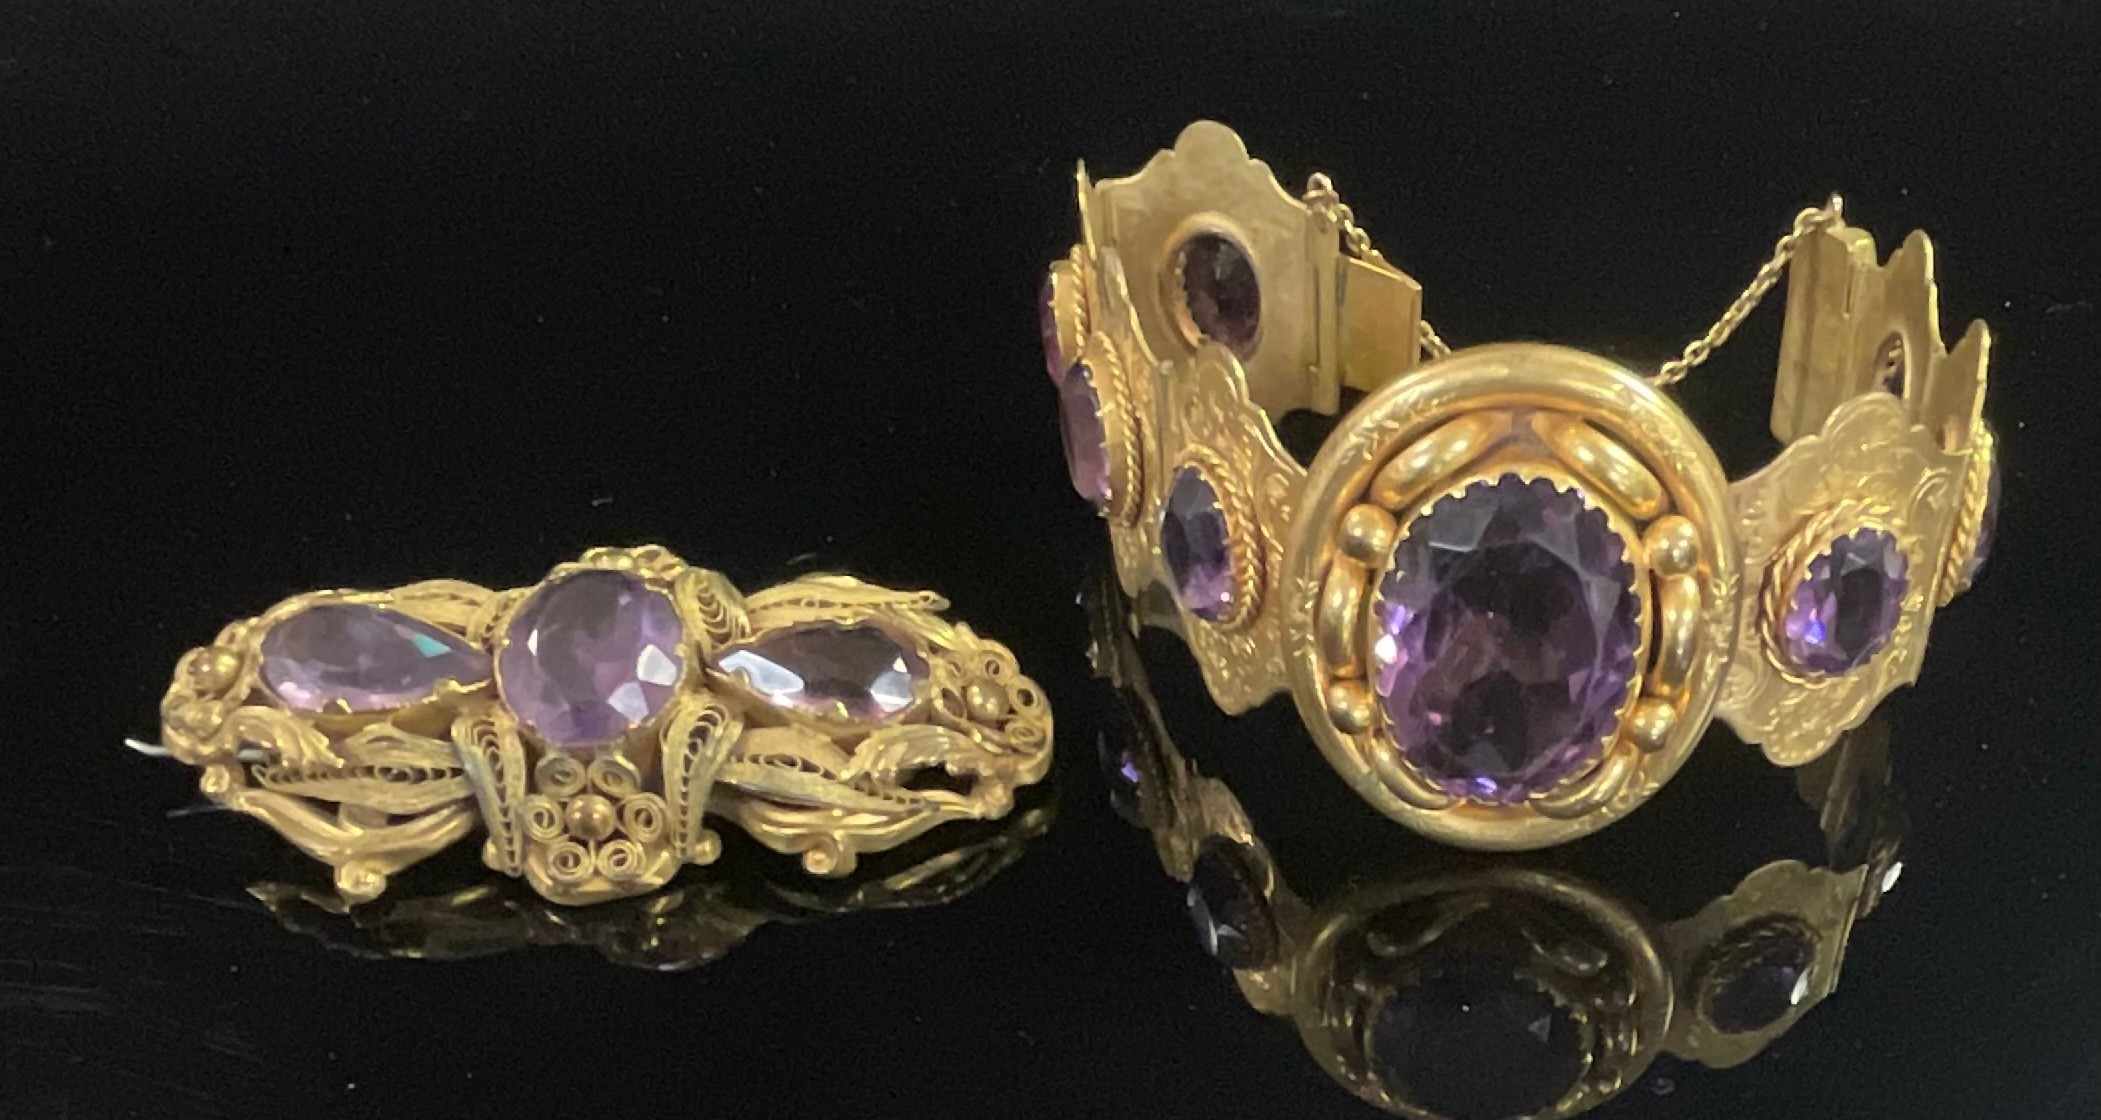 A 19th century pale purple amethyst and gilt metal bracelet, set with one large and seven smaller